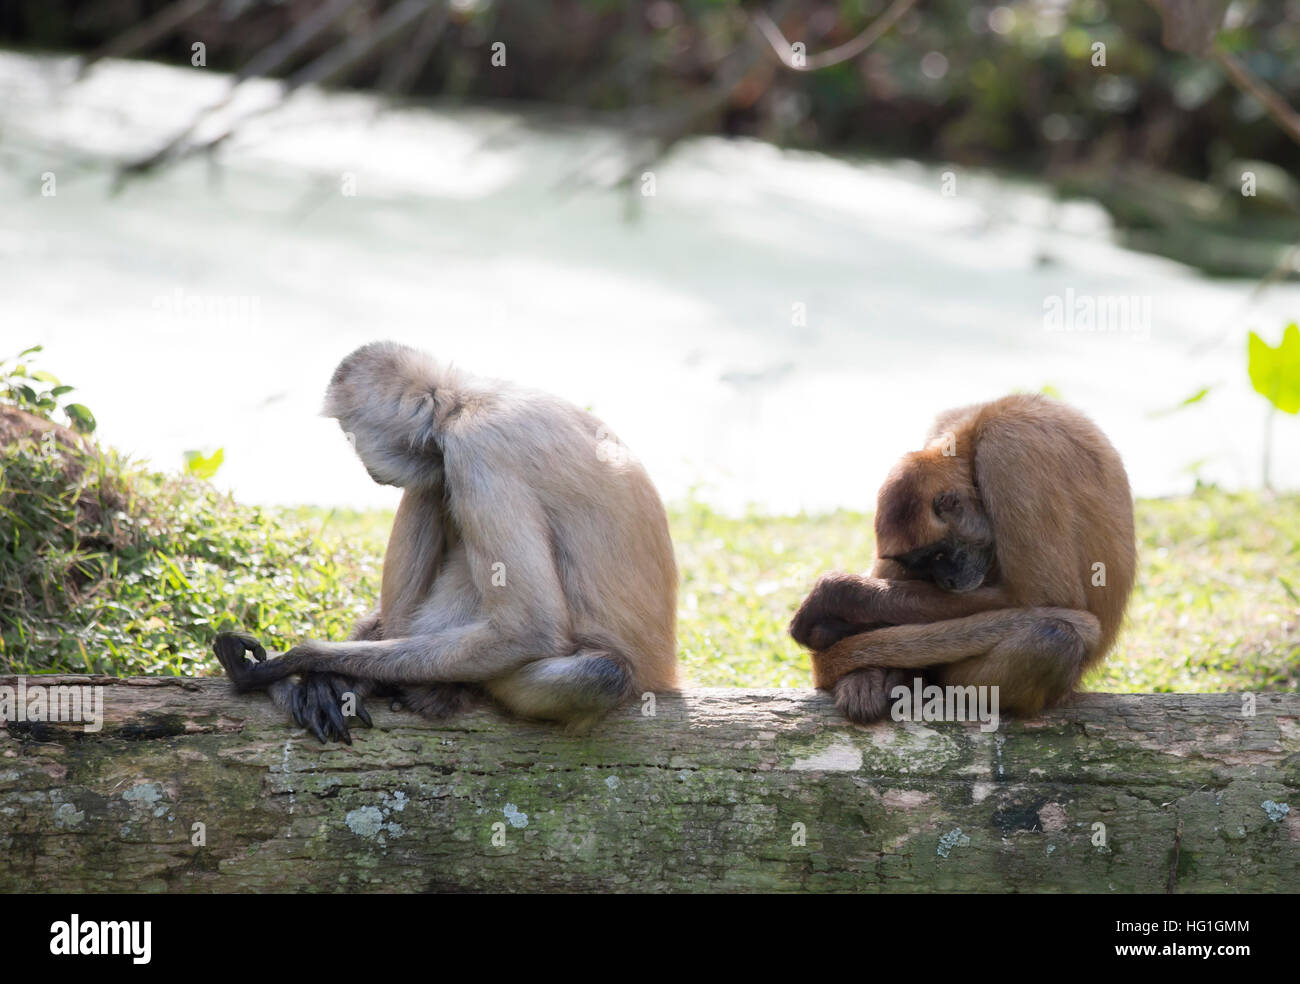 Geoffroy’s spider monkeys relaxing on a log Stock Photo